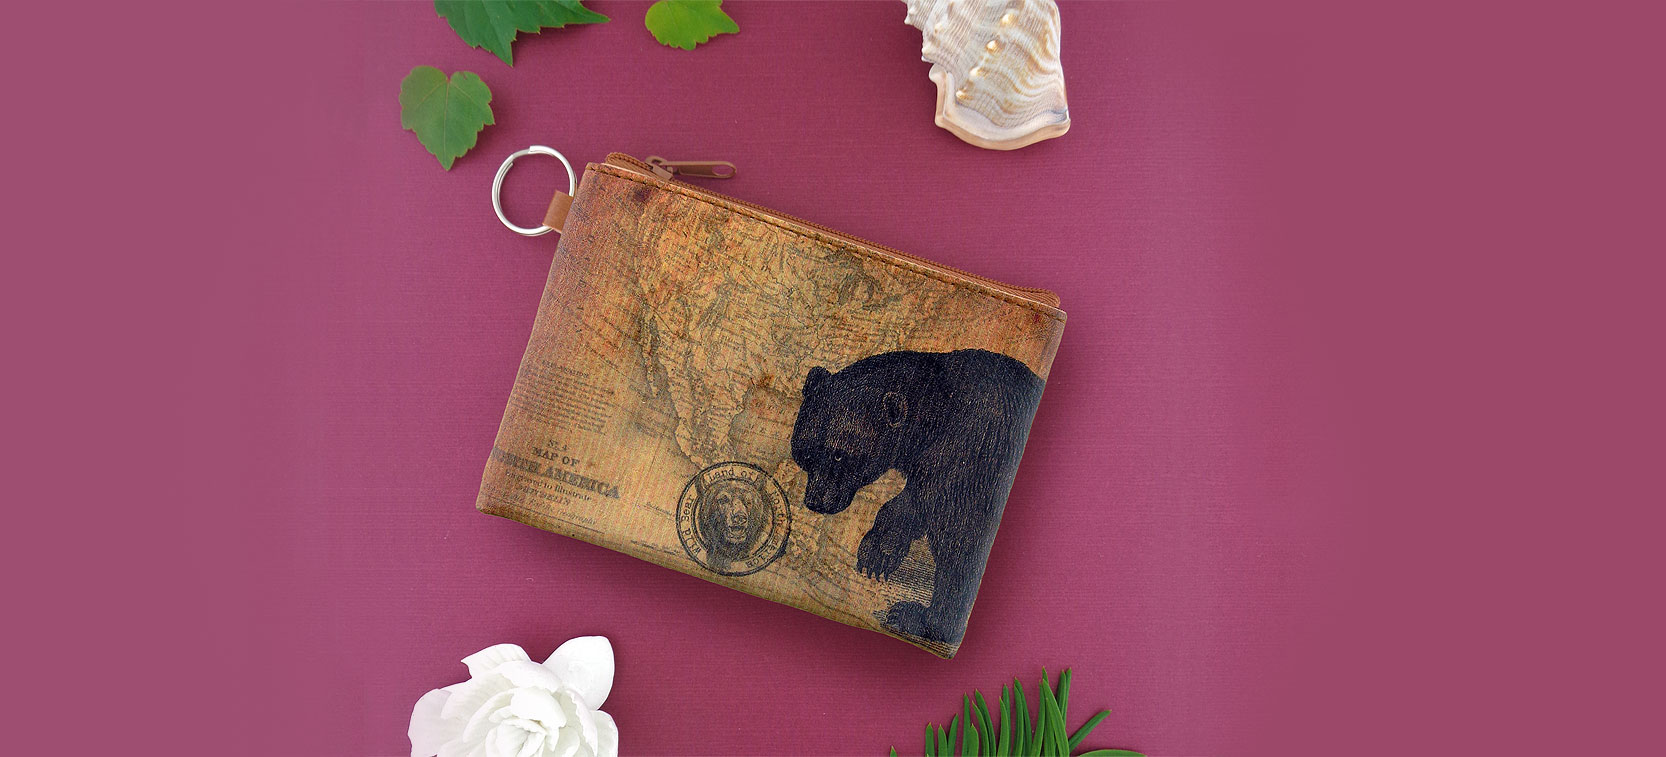 bear themed gifts